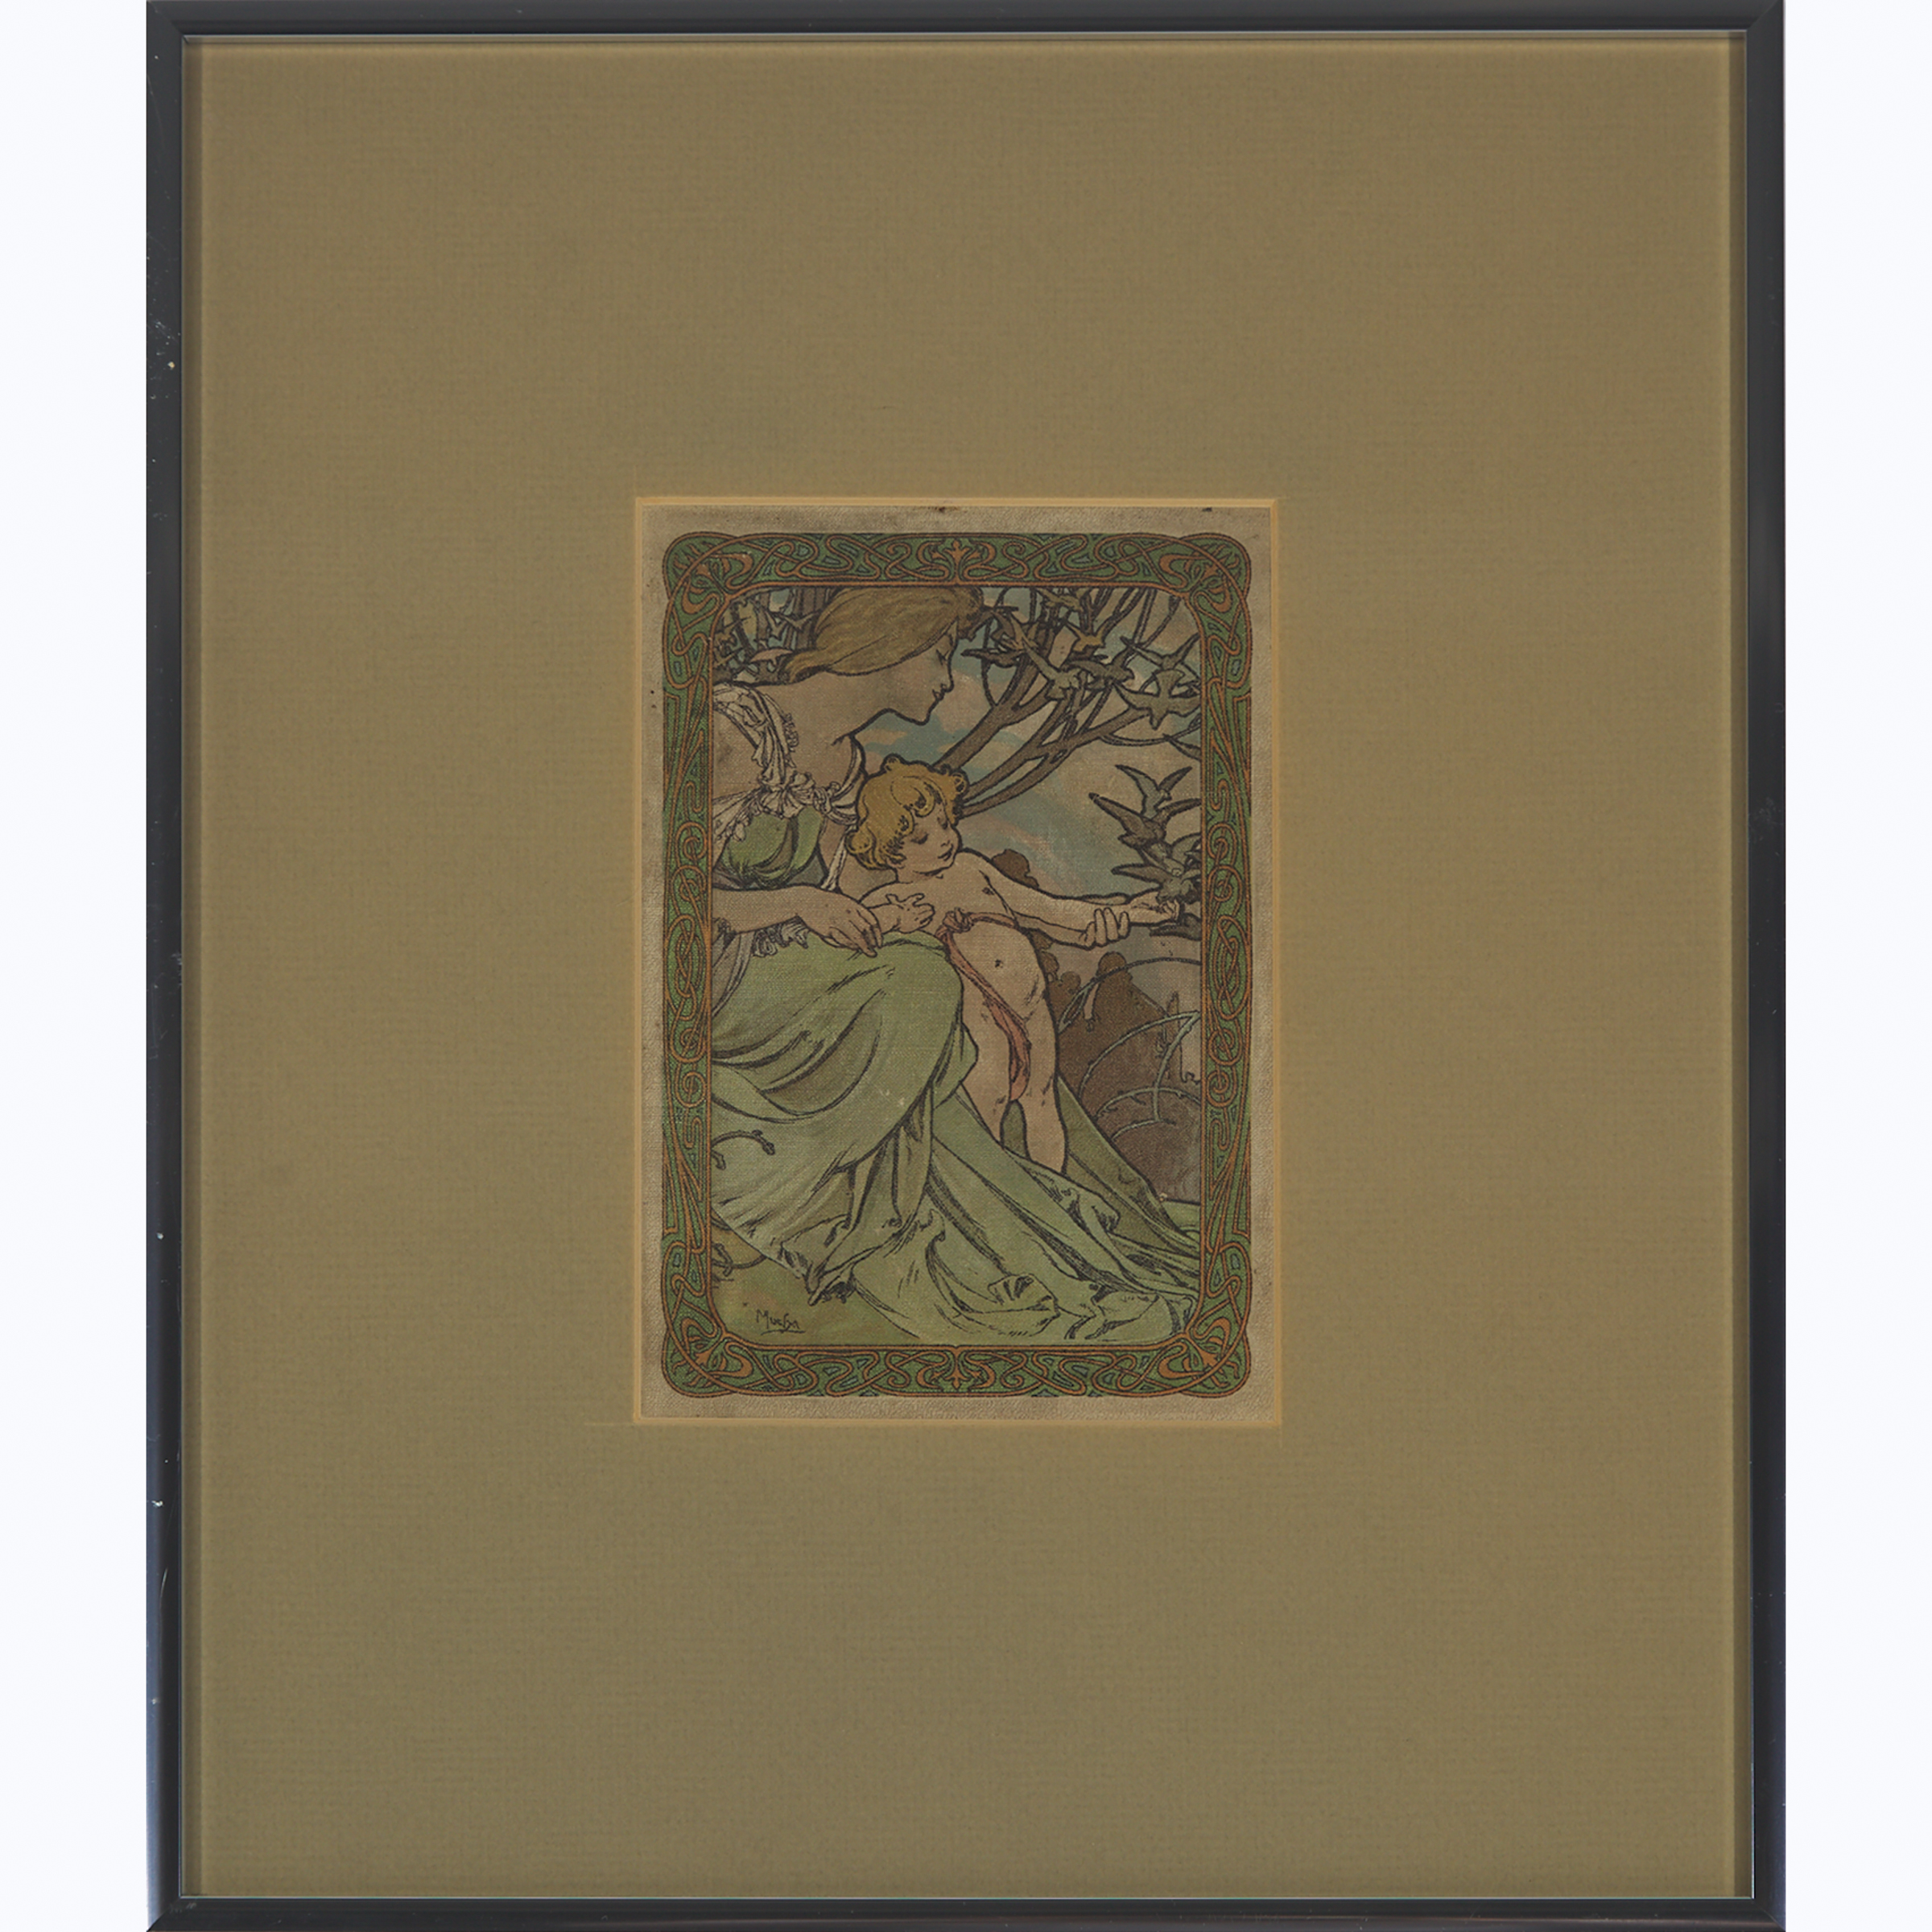 Pair of French Art Nouveau Embossed Prints on Glazed Linen, after Alphonse Mucha (1860-1939), early 20th century